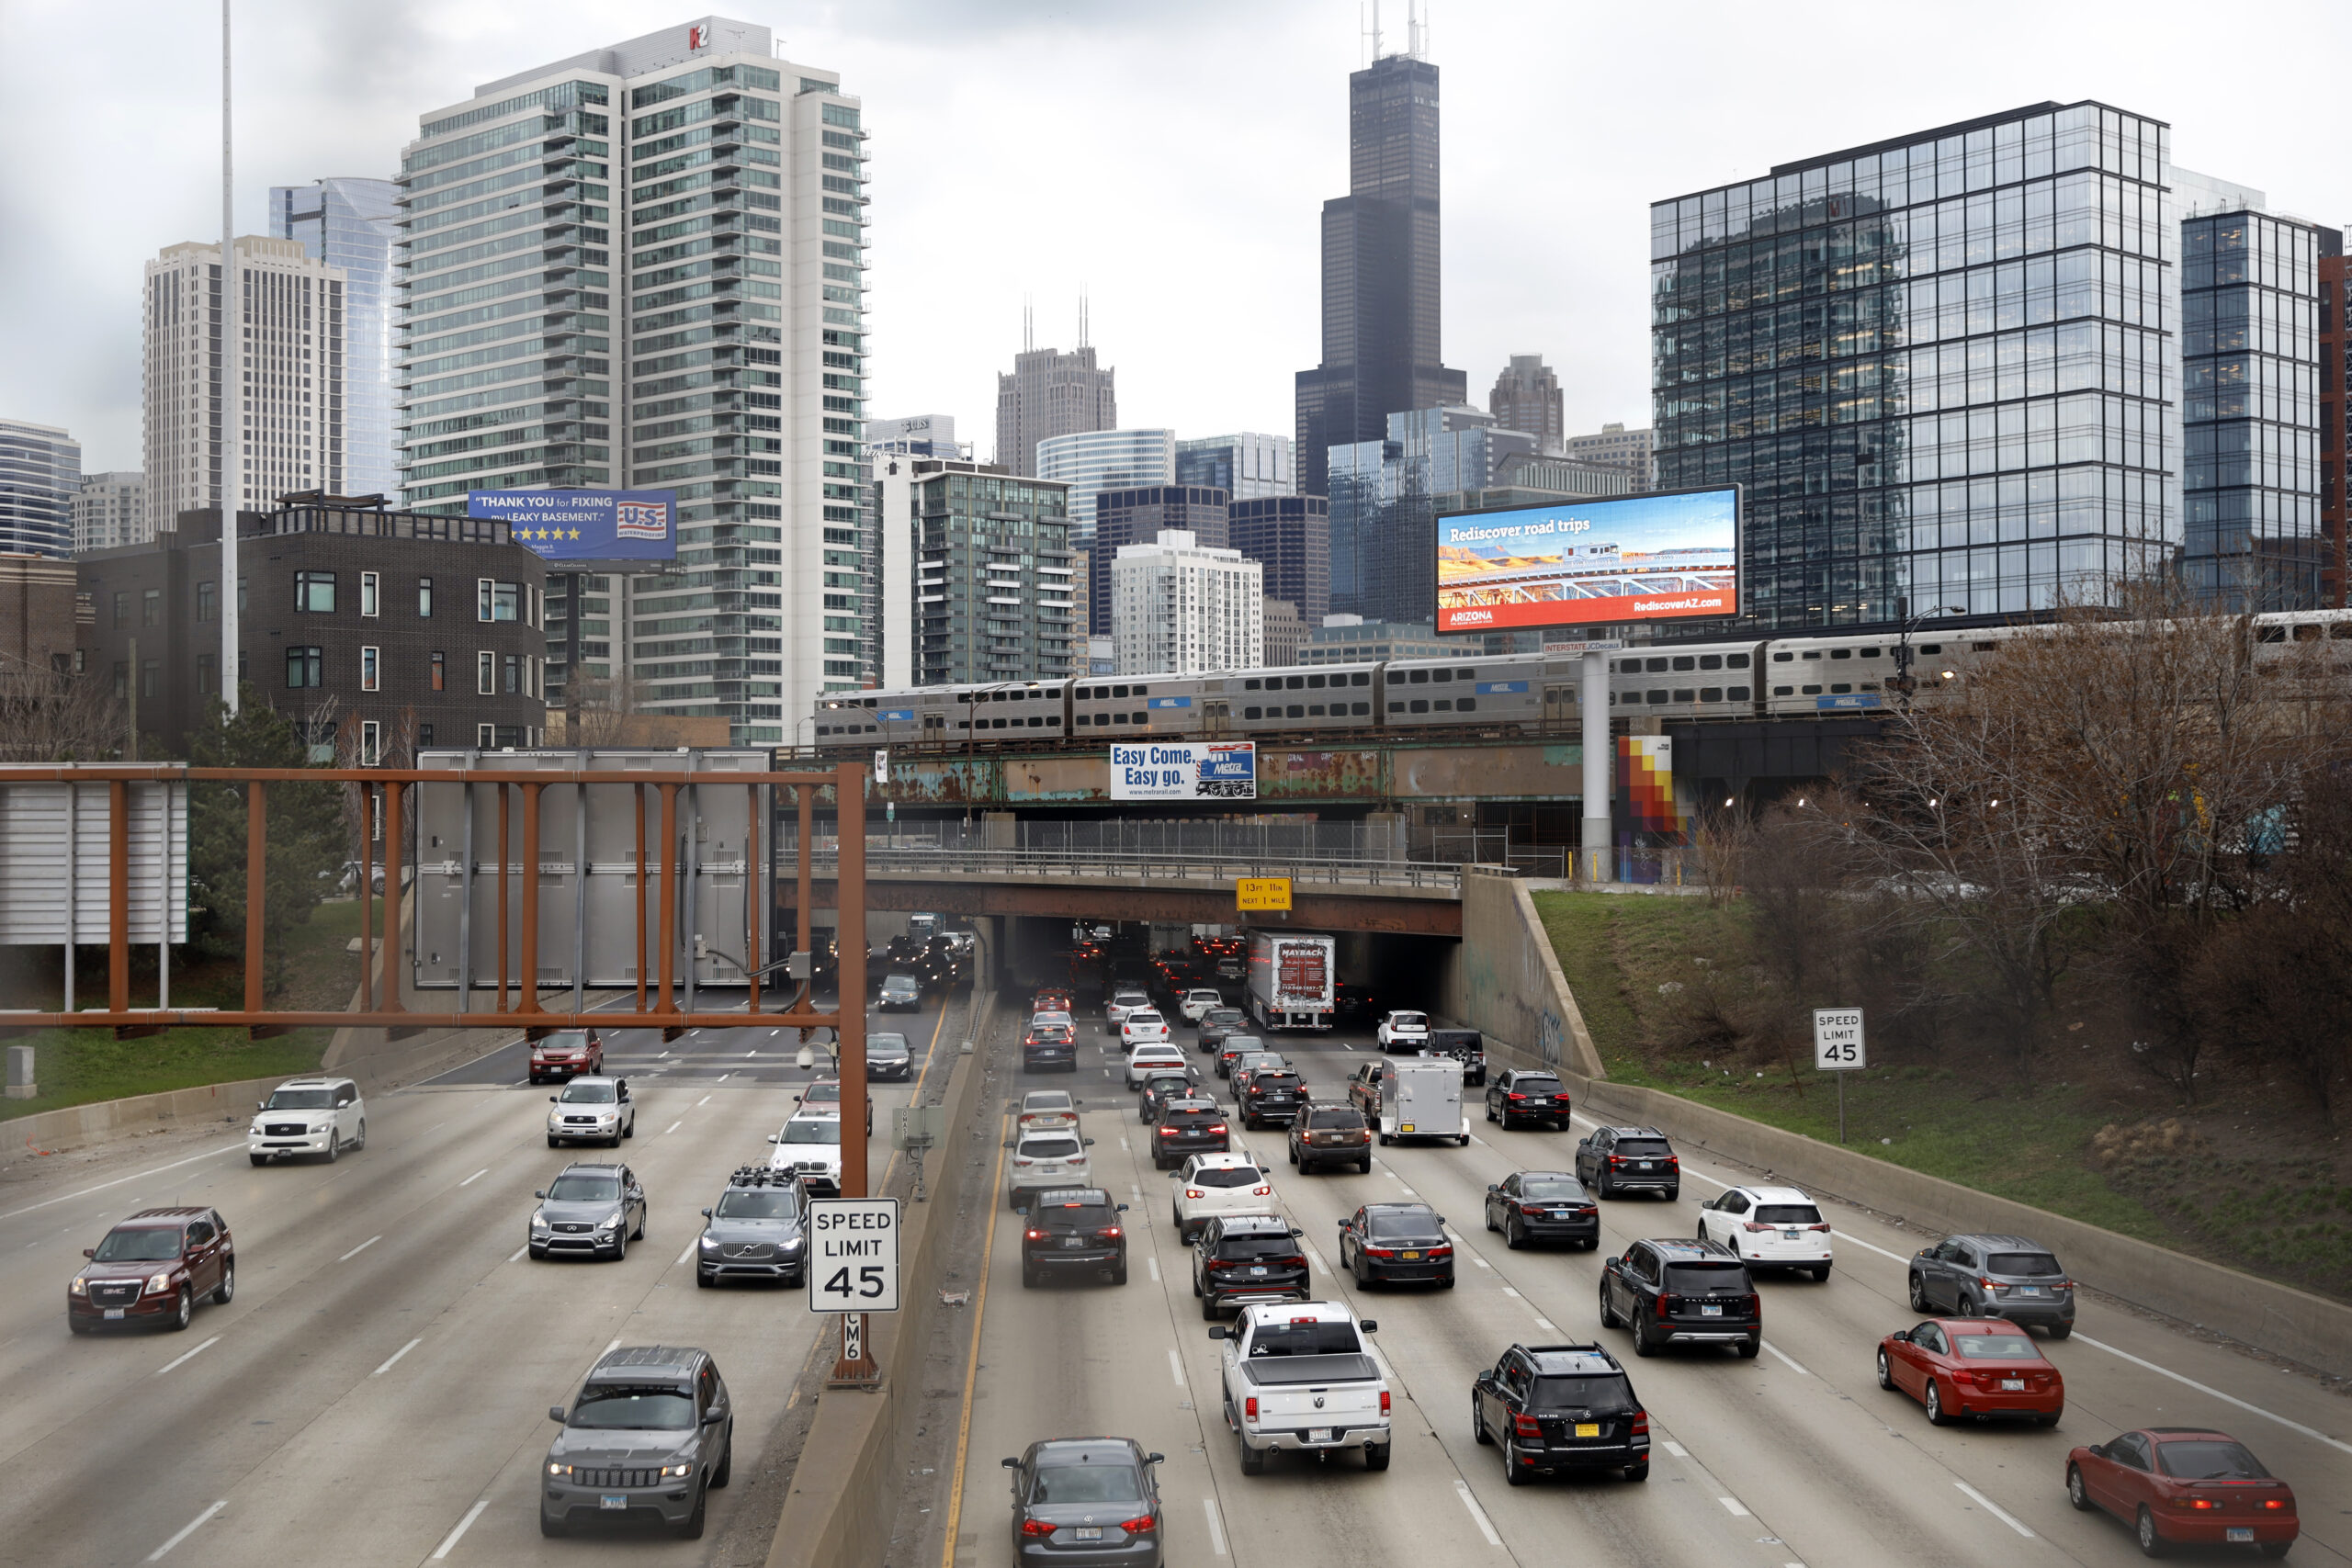 FILE - In this March 31, 2021,photo, traffic flows along Interstate 90 highway as a Metra suburban commuter train moves along an elevated track in Chicago. Congress has created a new requirement for automakers: find a high-tech way to keep drunken people from driving cars. It's one of the mandates along with a burst of new spending aimed at improving auto safety amid escalating road fatalities in the $1 trillion infrastructure package that President Joe Biden is expected to sign soon. (AP Photo/Shafkat Anowar, File)